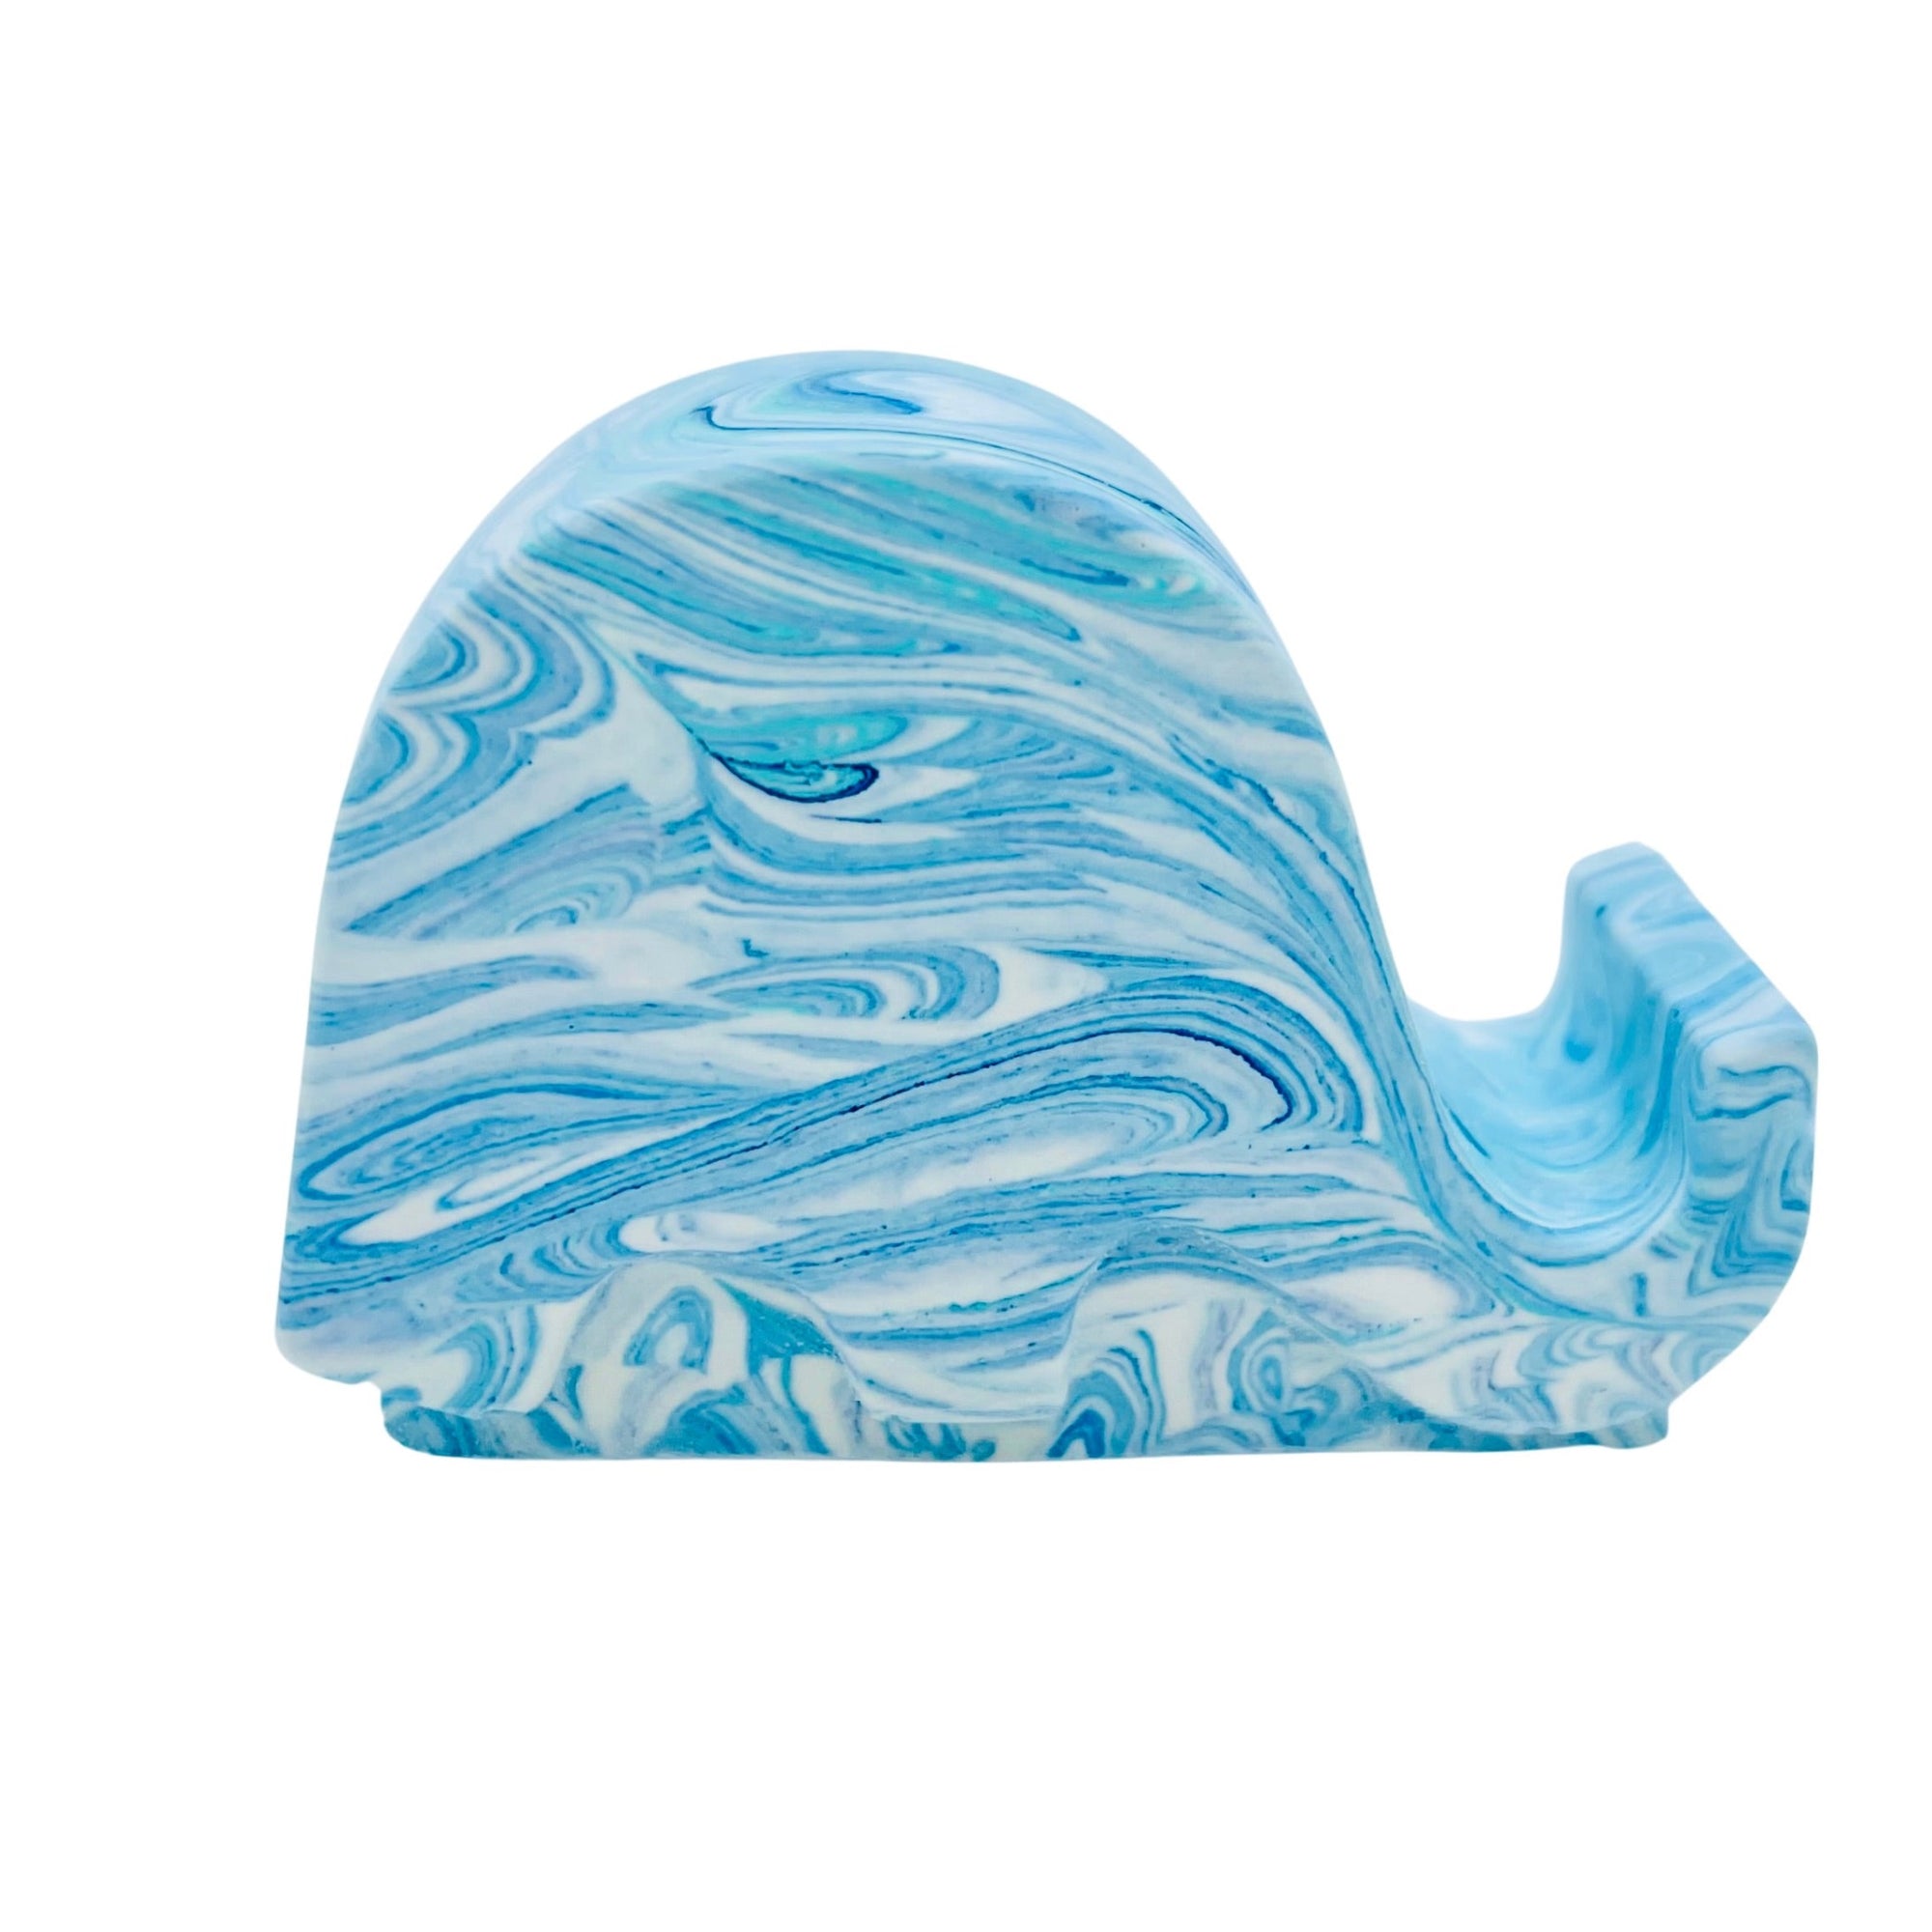 A Jesmonite elephant mobile phone stand measuring 6.5cm in length marbled with baby blue and turquoise pigment.